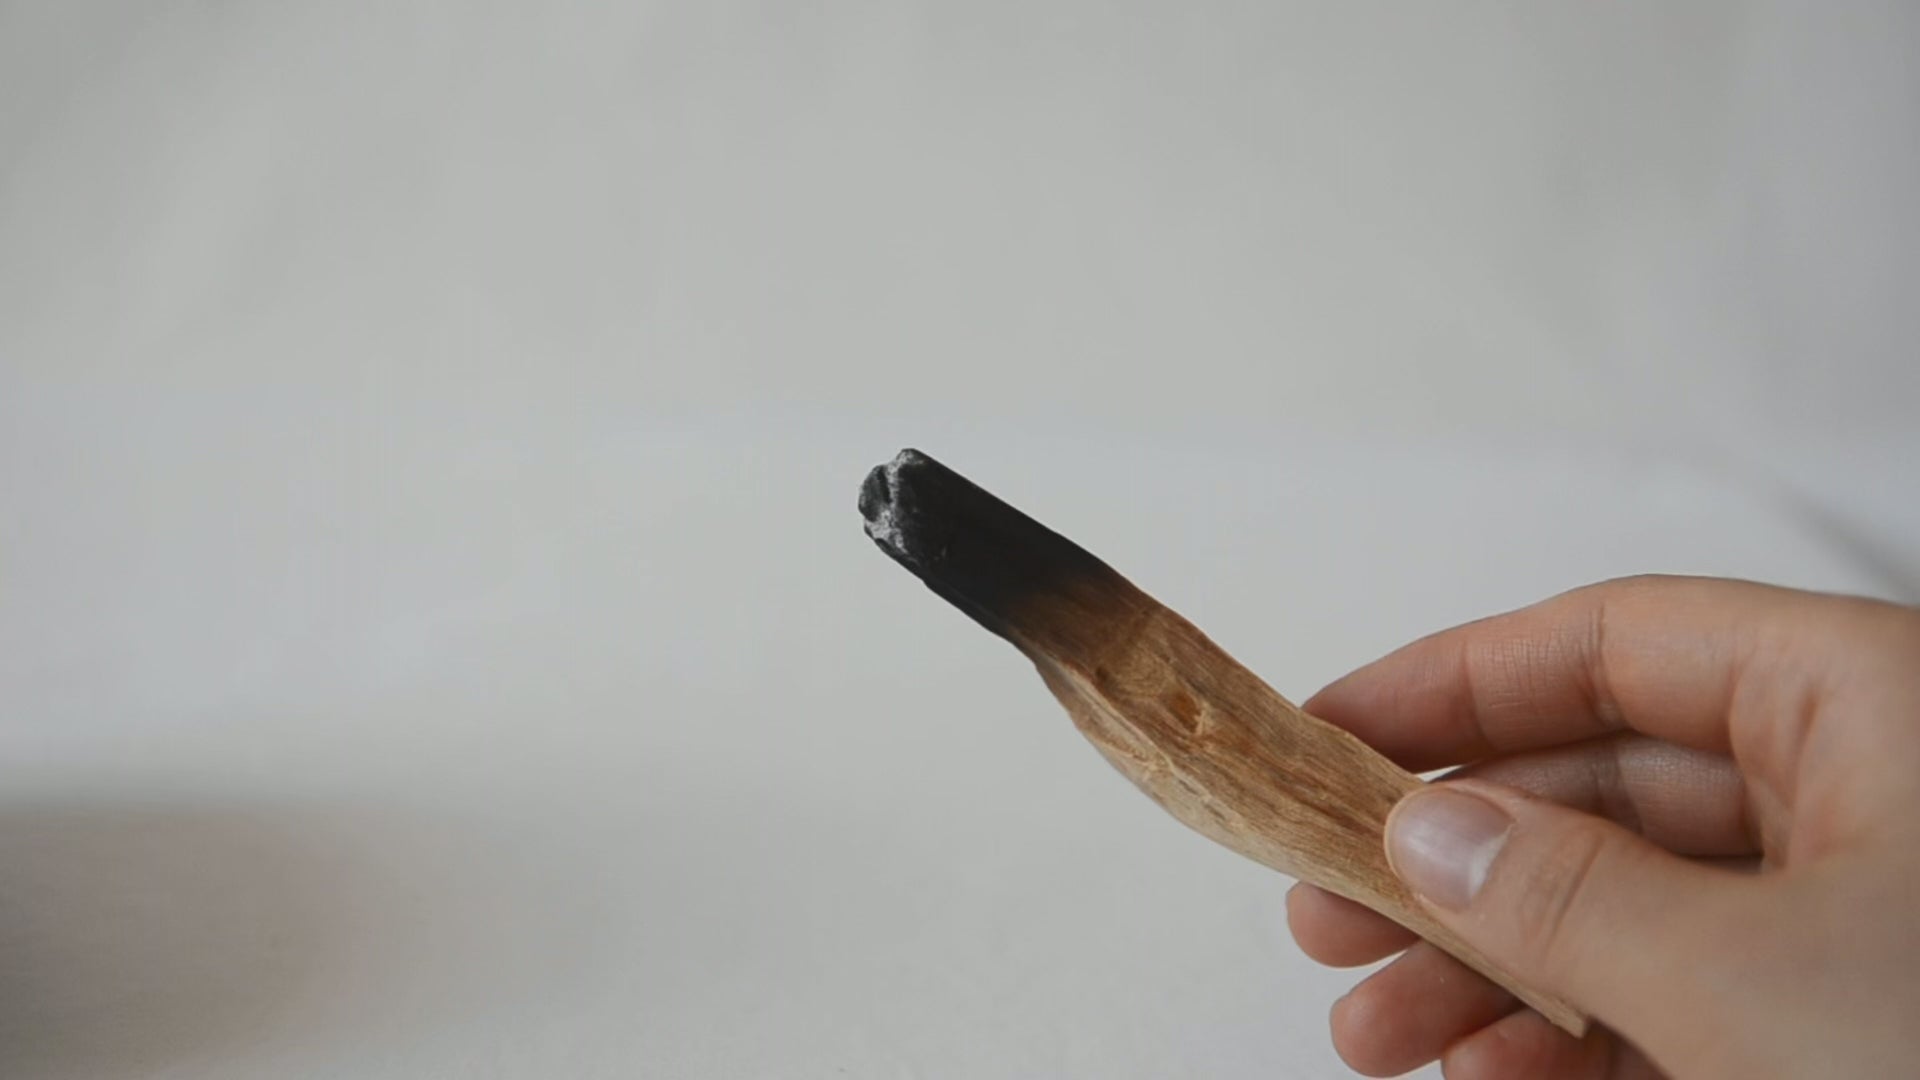 Showing how to smudge stick.